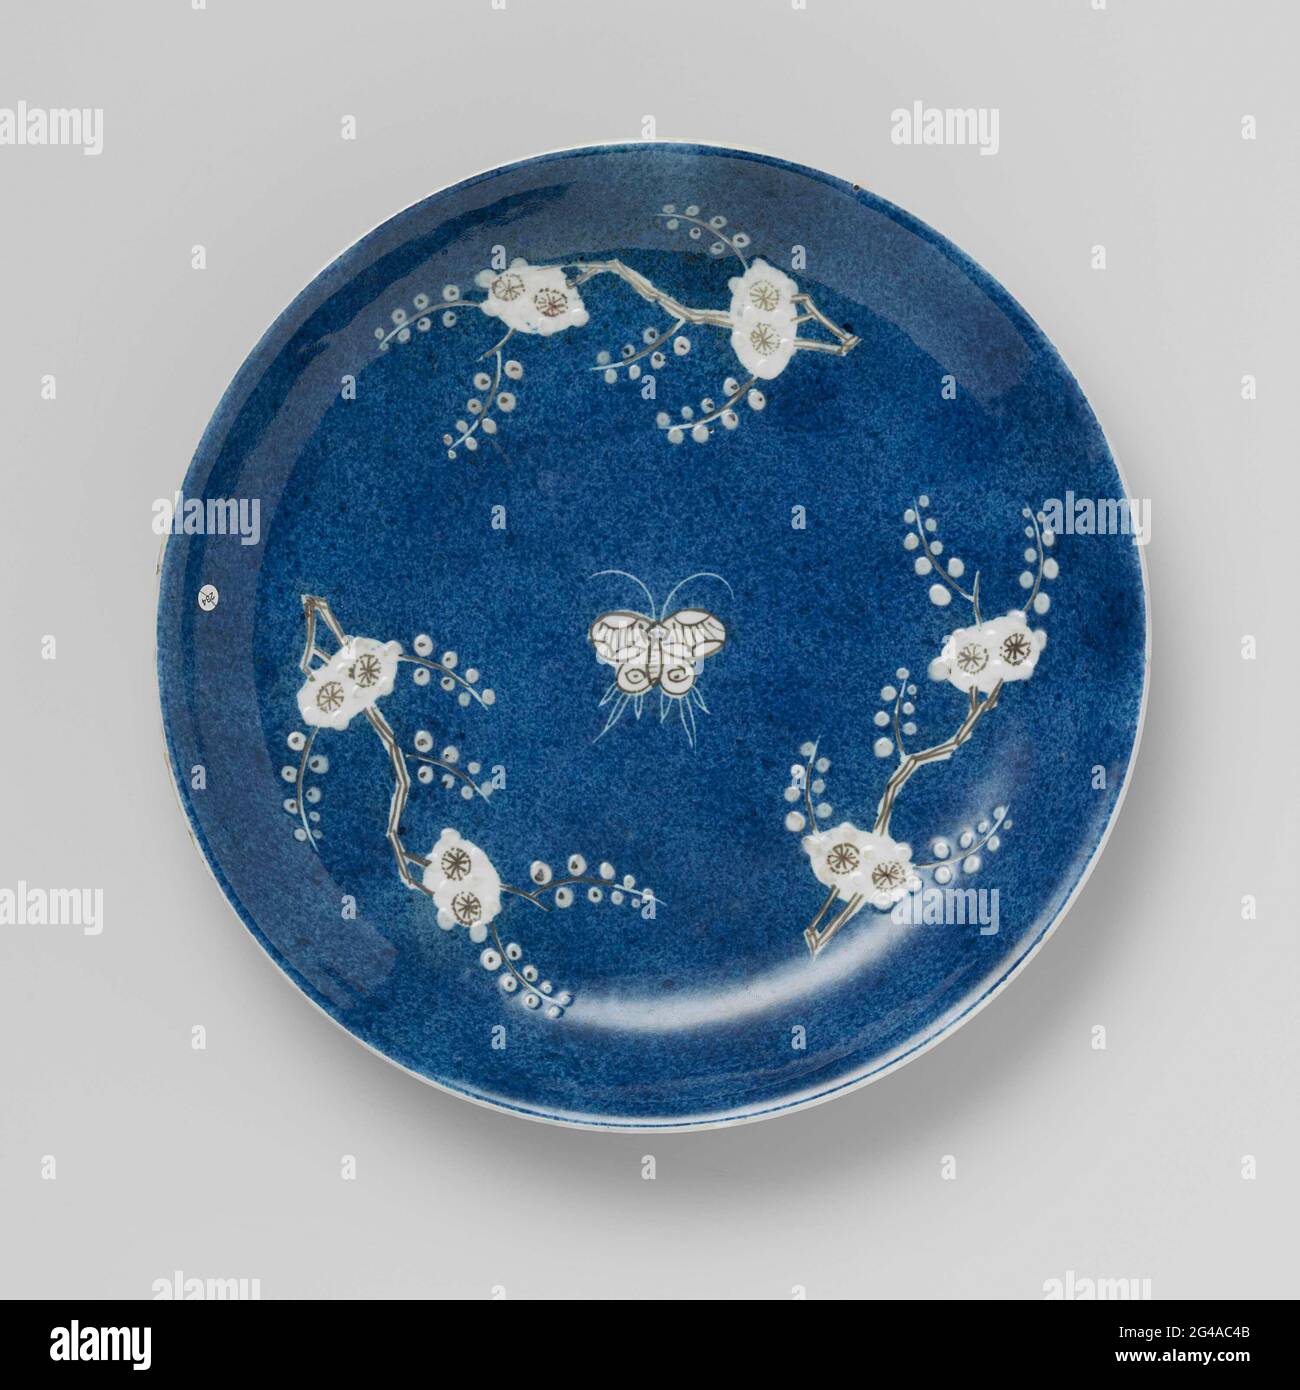 Saucer-Dish With Powder Blue, Prunus Sprays and Butterflies. Dish with  round wall of porcelain, painted in underglaze blue, red and white sludge.  The entire front is covered with bleu poudré (powder blue)